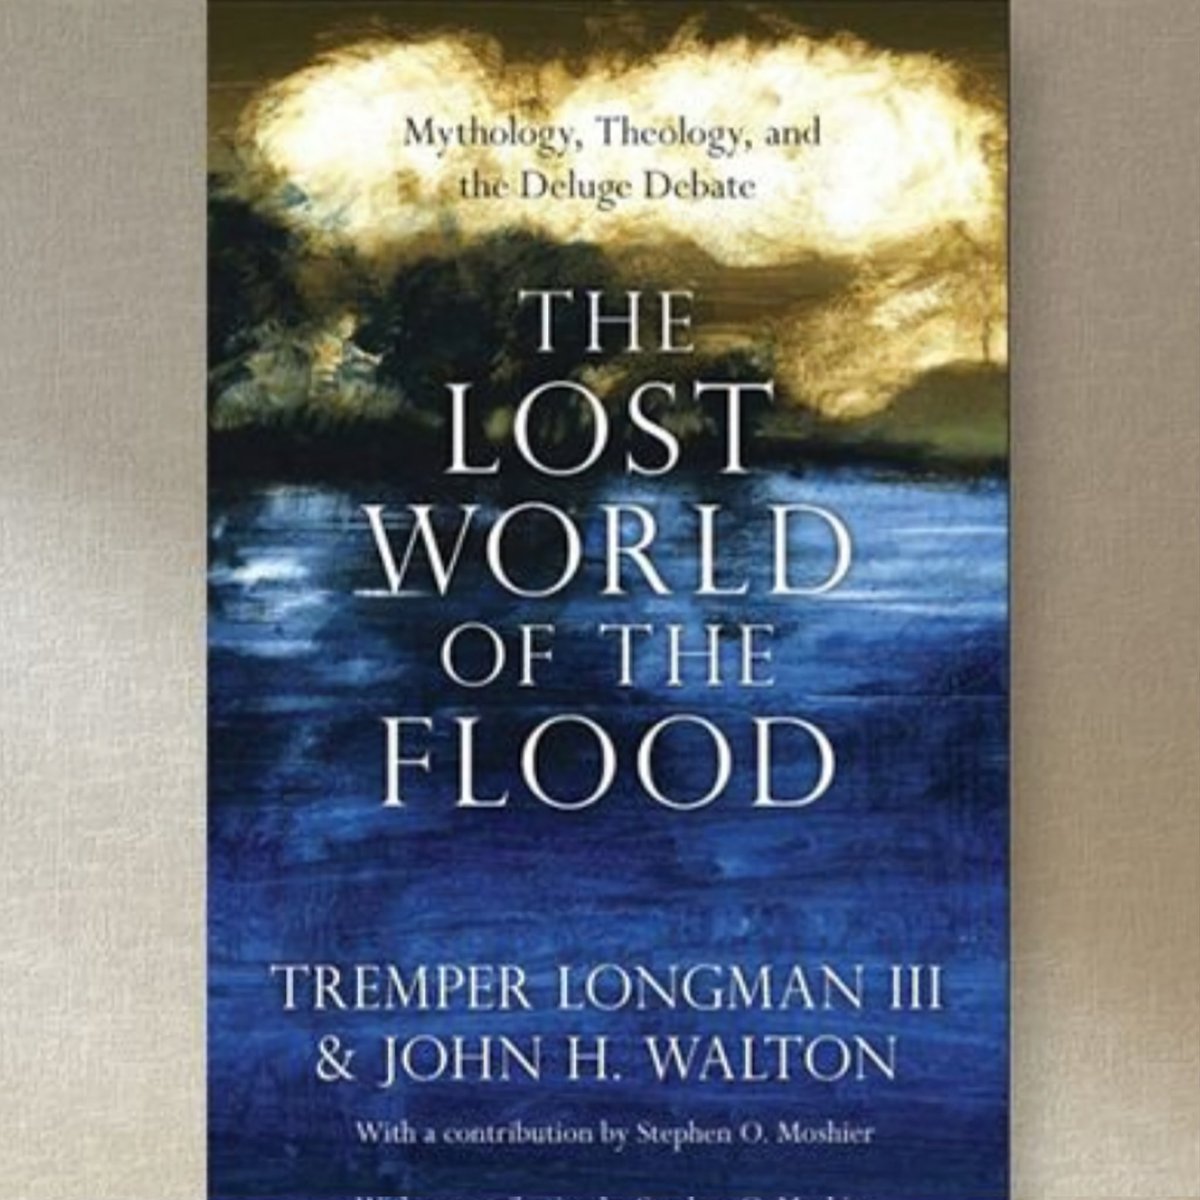 #46 a very good look at the flood narrative from many different ancient perspectives, trying to understand it in the way those who first told it and heard it intended #flood #noah #ancienthistory #ancienttext #read #reading #knowledge #greatreads #enjoyable #bookoftheweek